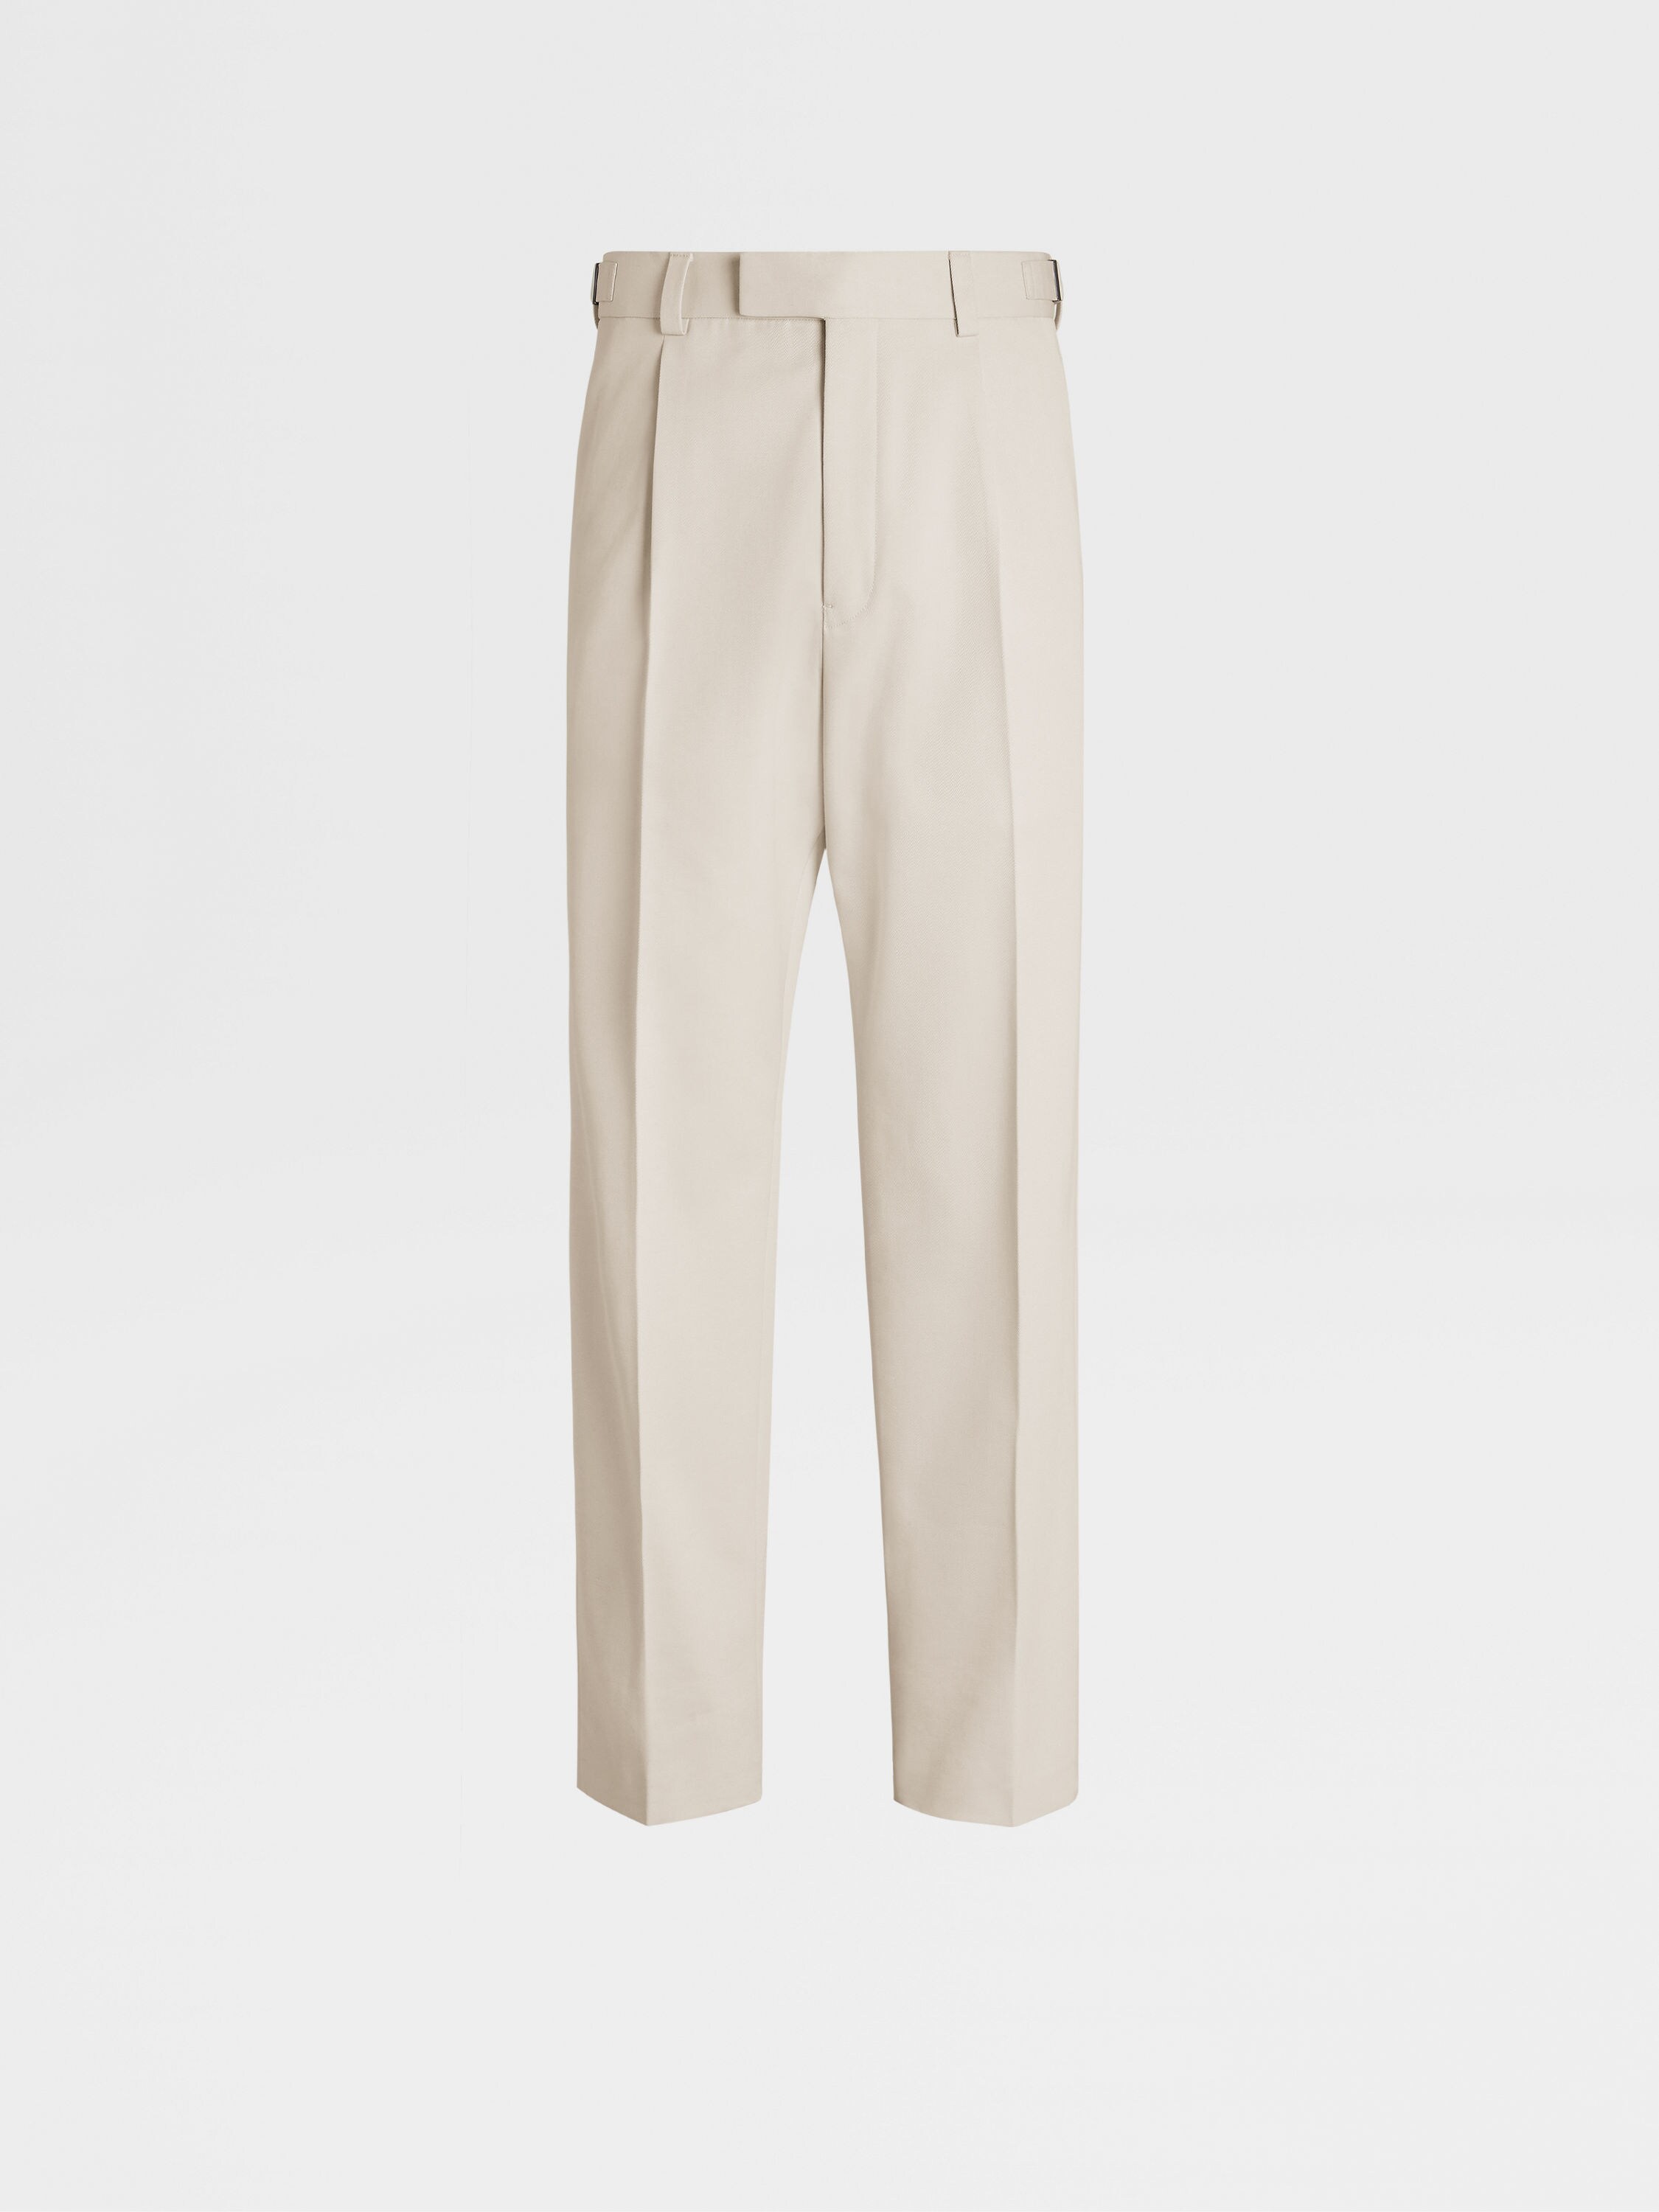 Off White Cotton and Wool One Pleat Pants FW23 25643688